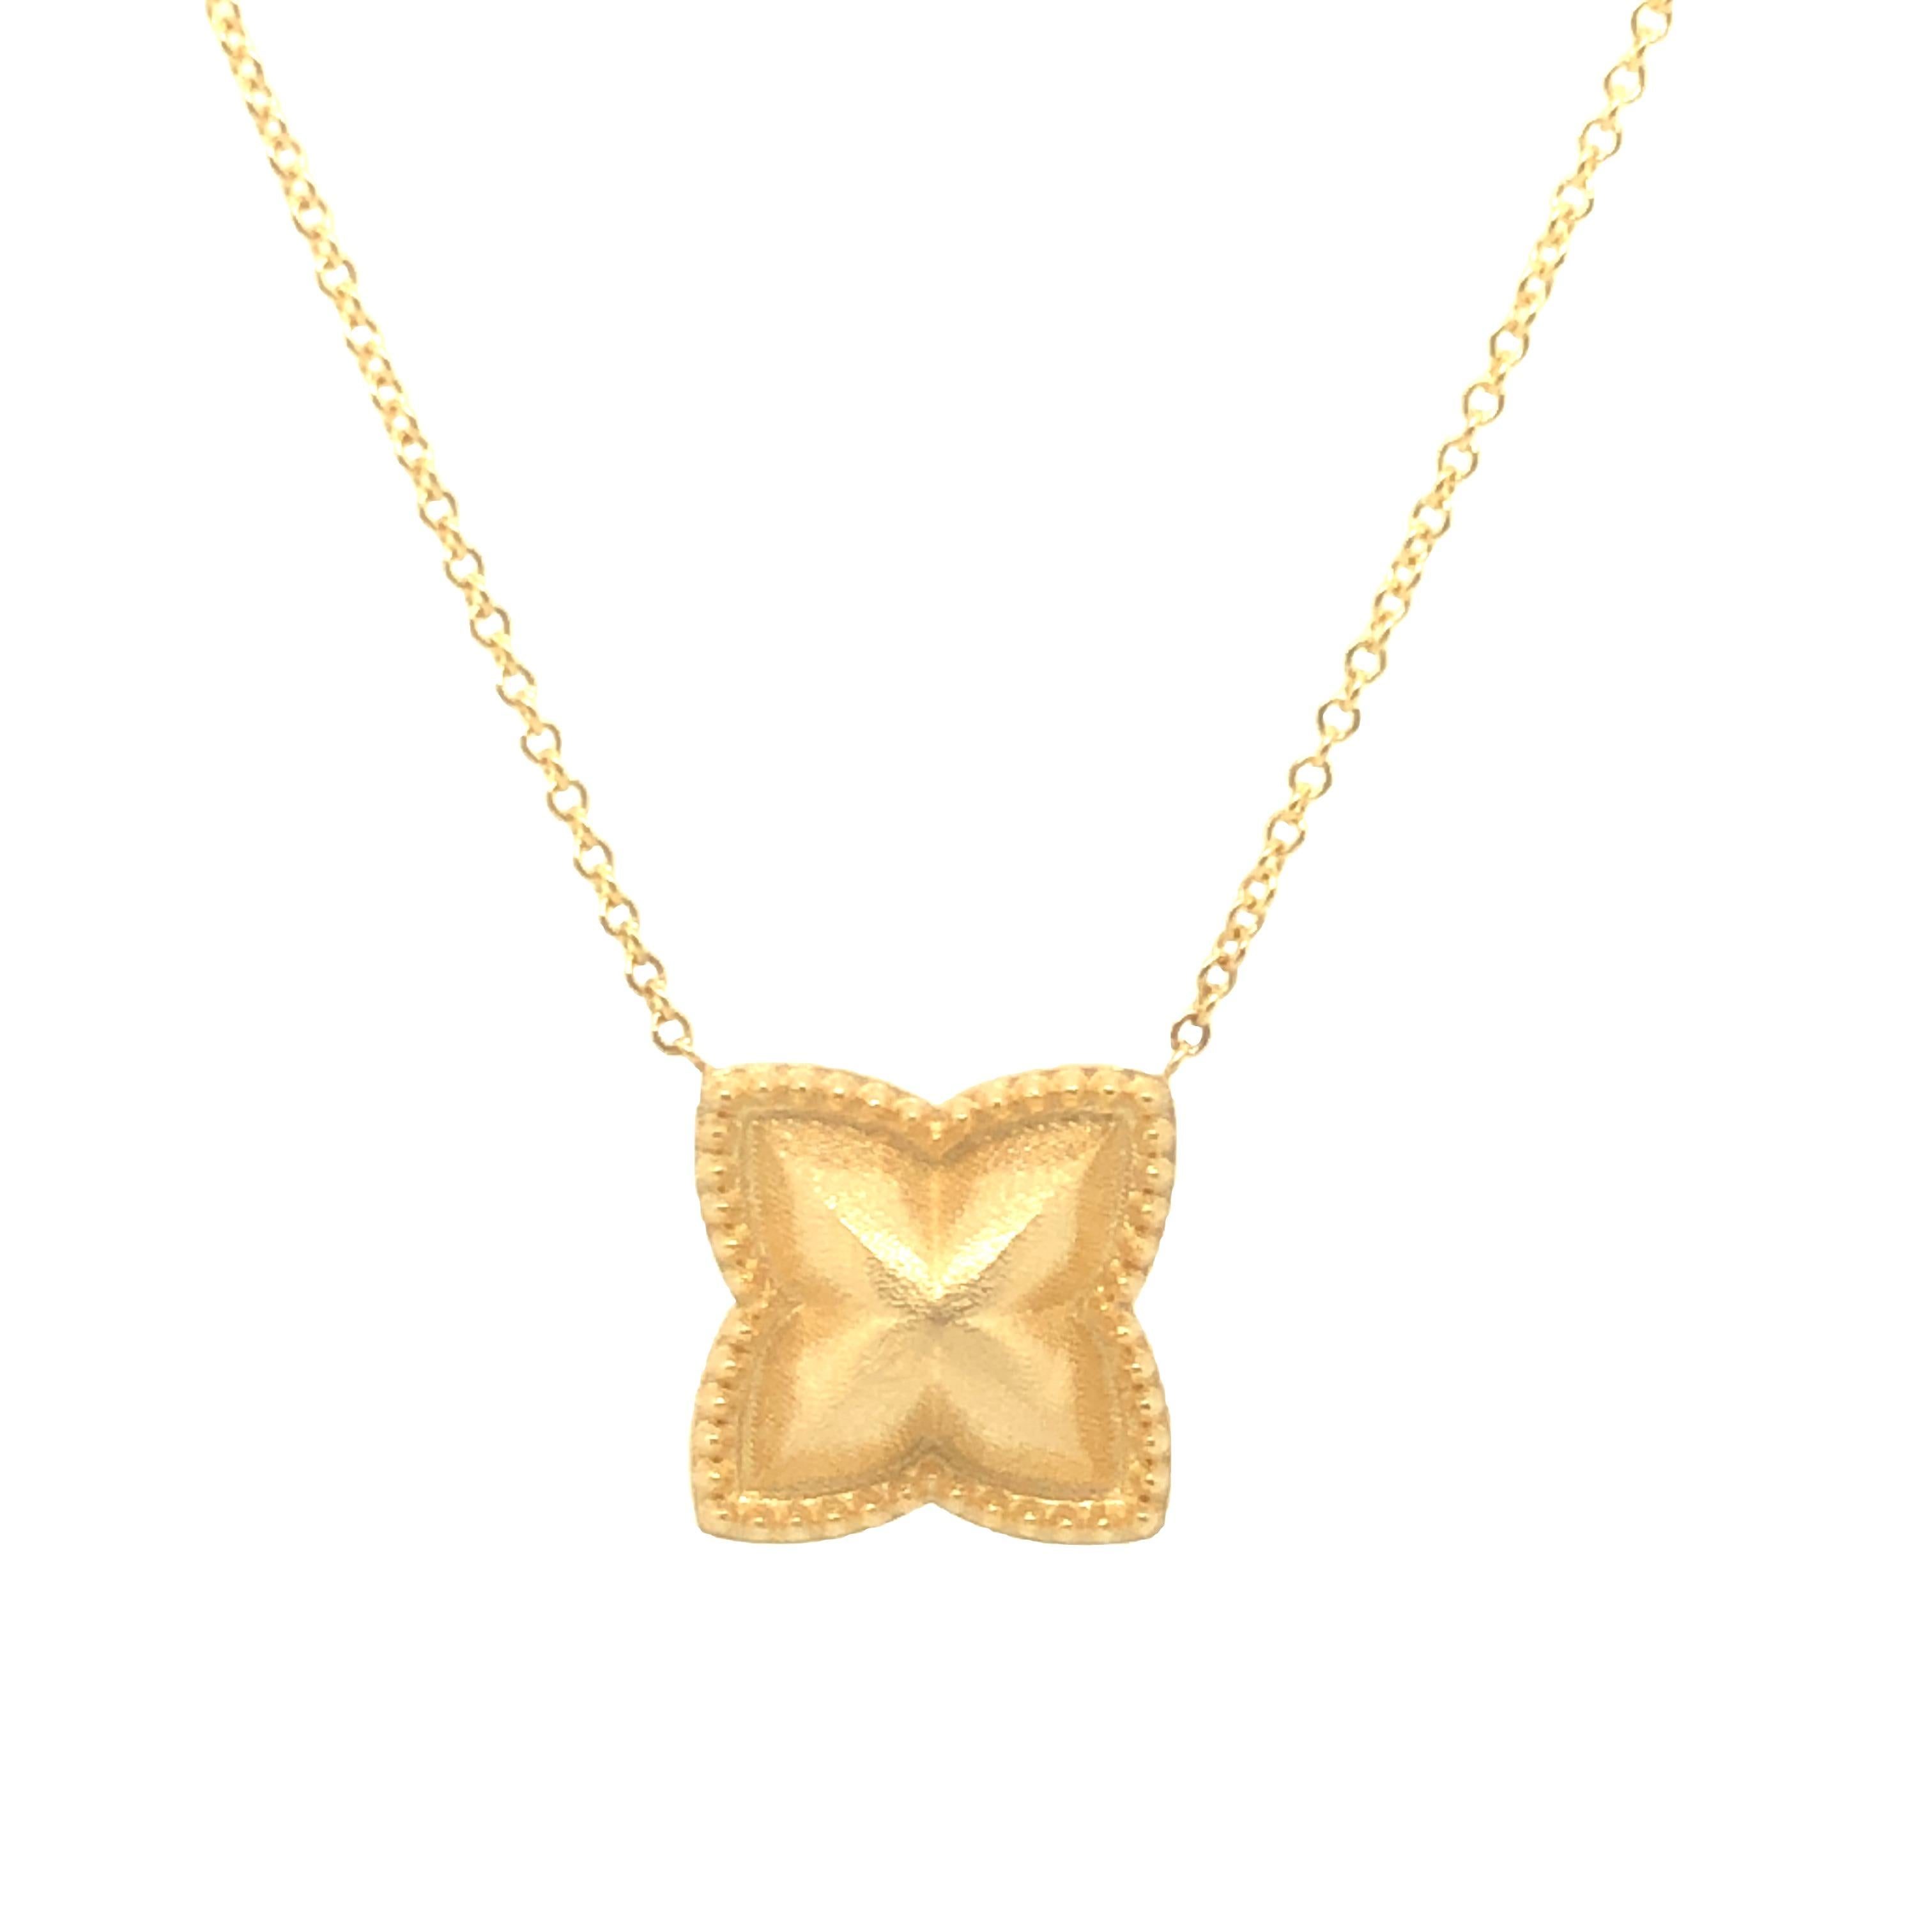 Designed and handcrafted by our team at Gems Are Forever, Beverly Hills. Inspired by an art motif during our trip to Thailand, this pendant brings minimalist beauty to your collection. This beautiful necklace is crafted in 14k yellow gold featuring